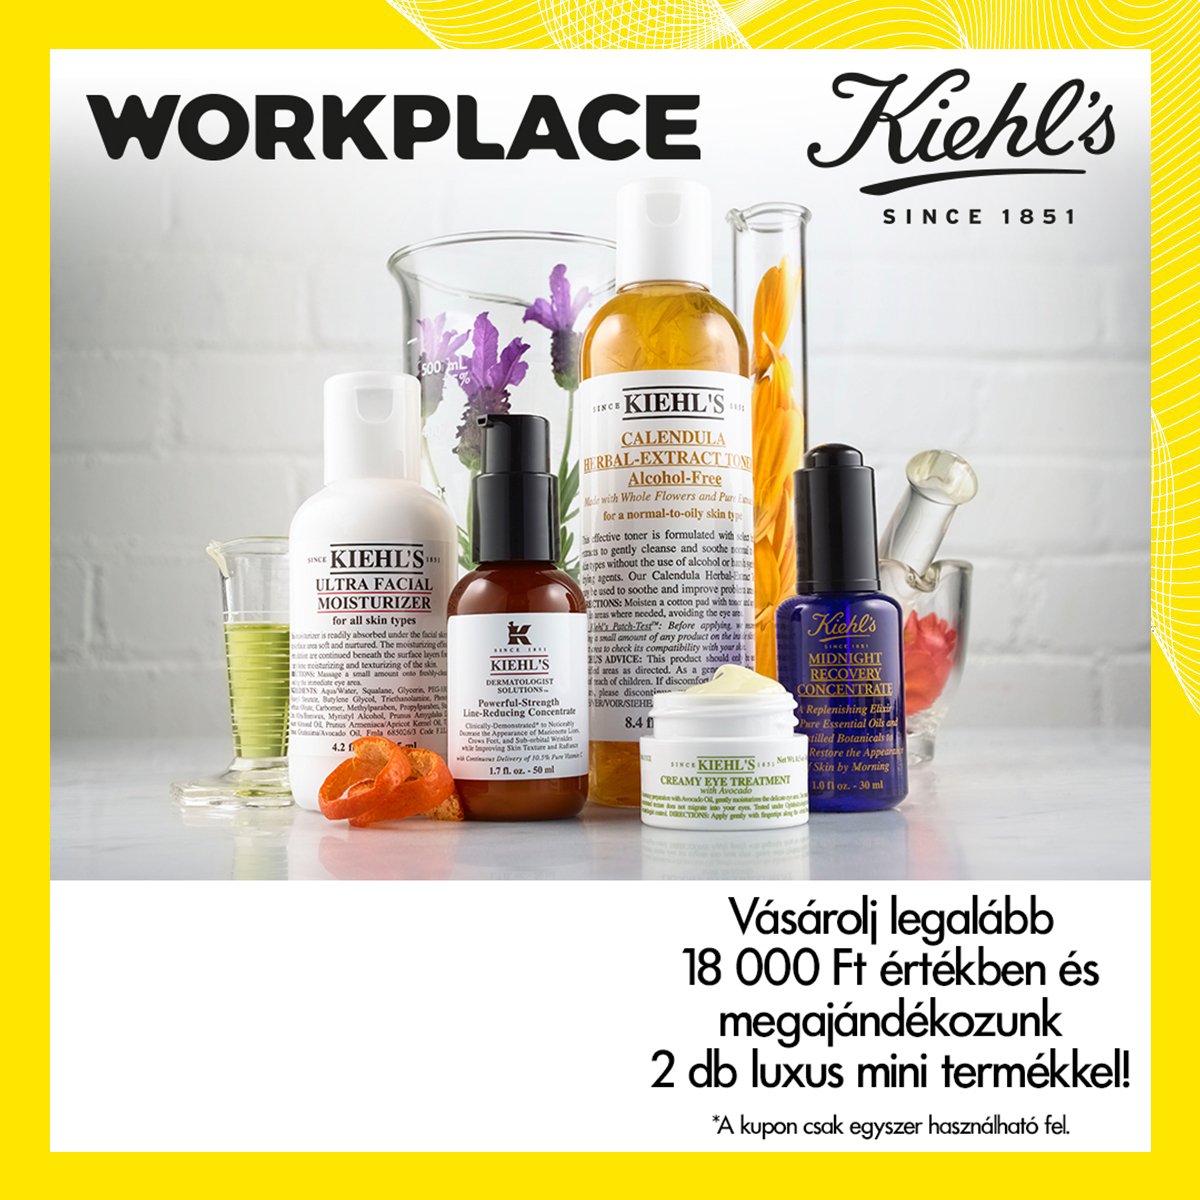 Keresd a Westend appban a Kiehl's Workplace kupont